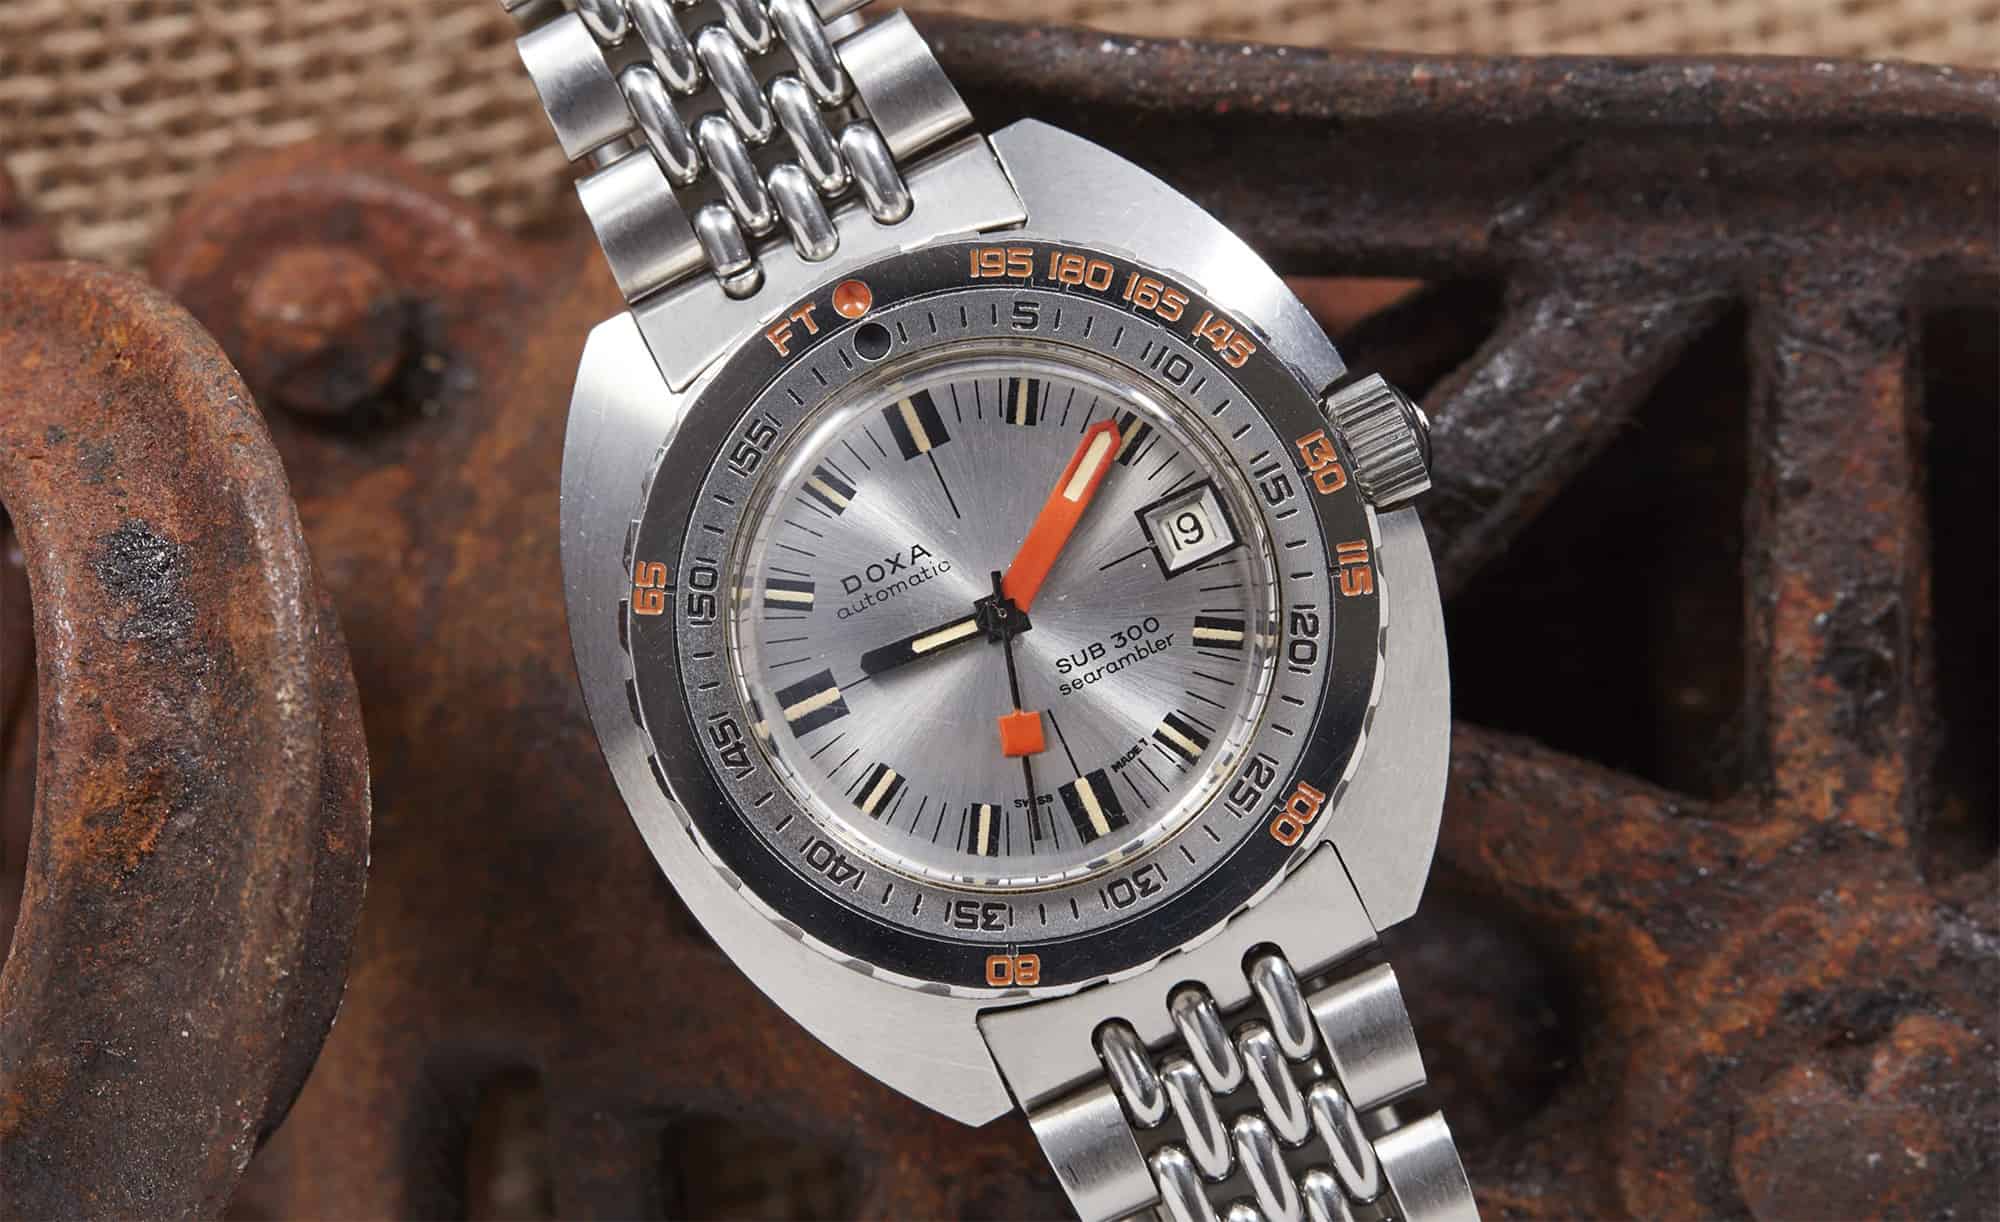 Review: The DOXA Sub 300, A Return To Form